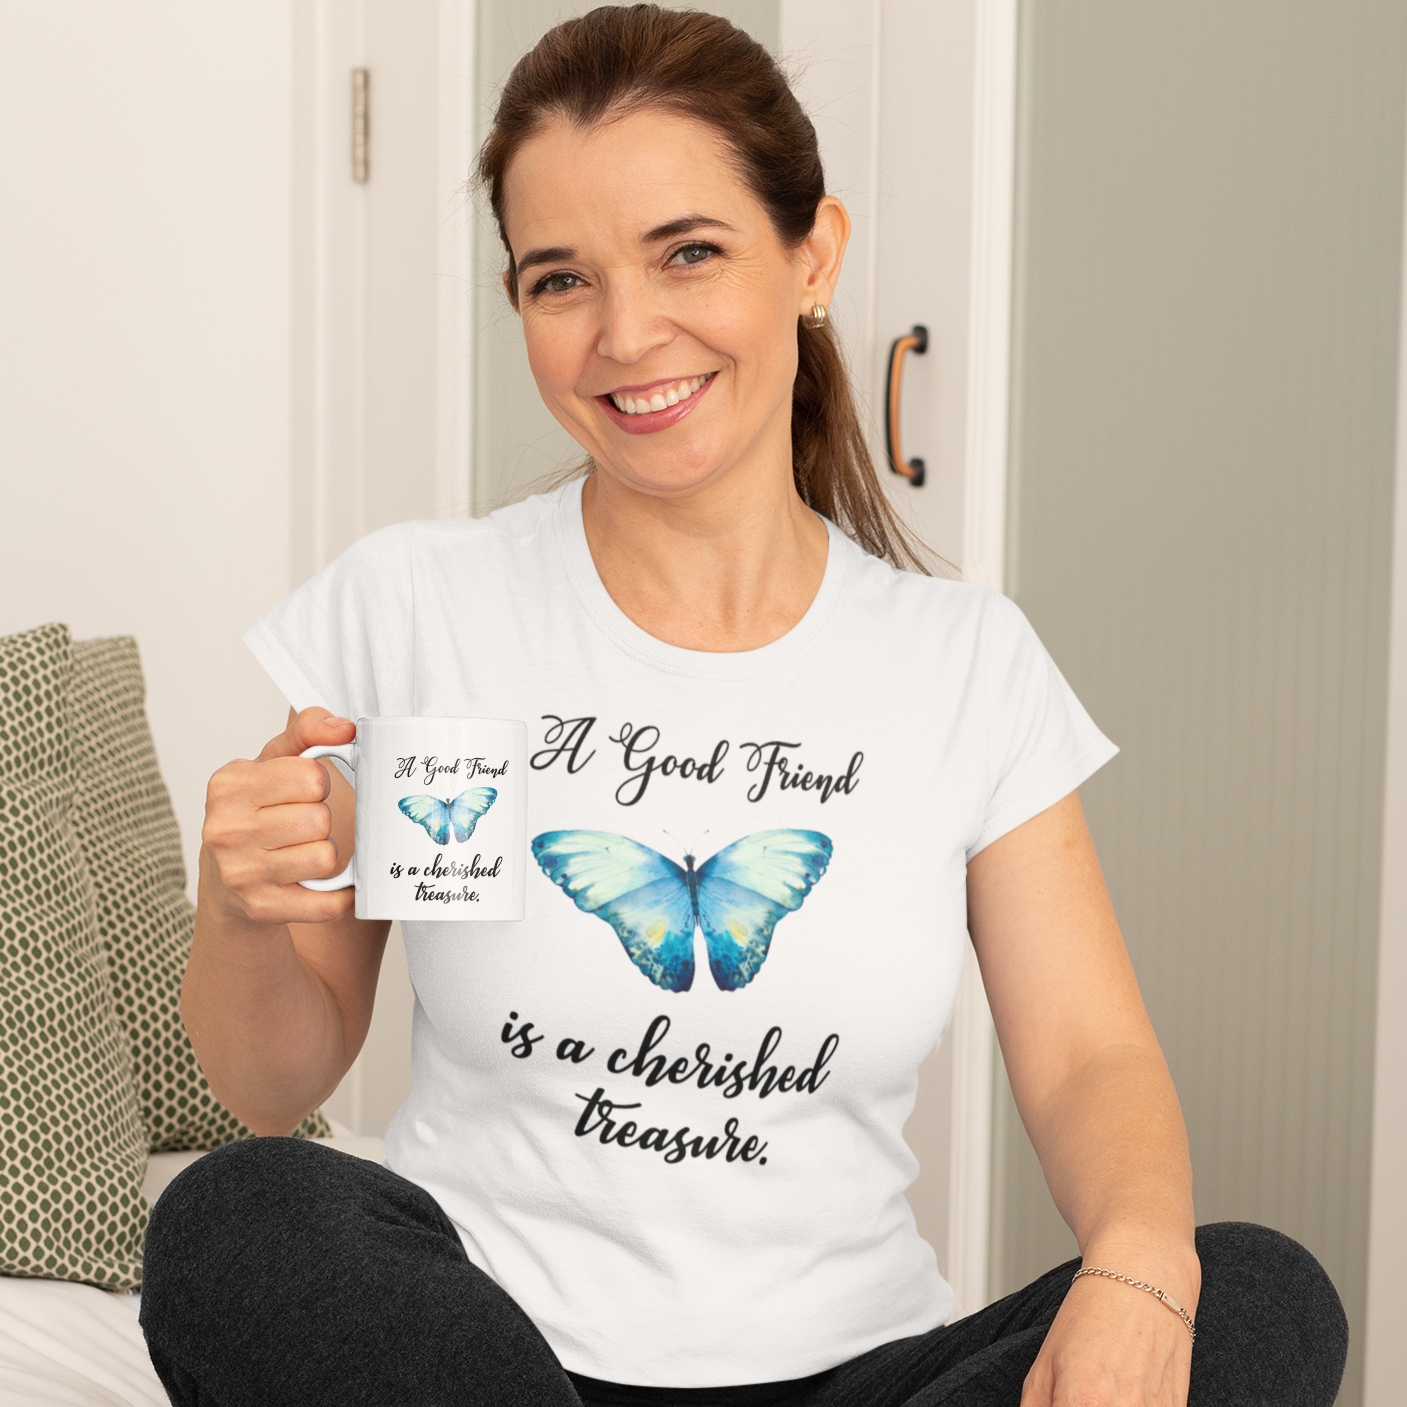 Smiling woman wearing a white Tshirt with a beautiful blue watercolor butterfly and the words, "A Good Friend is a cherished treasure.", holding a matching ceramic mug.